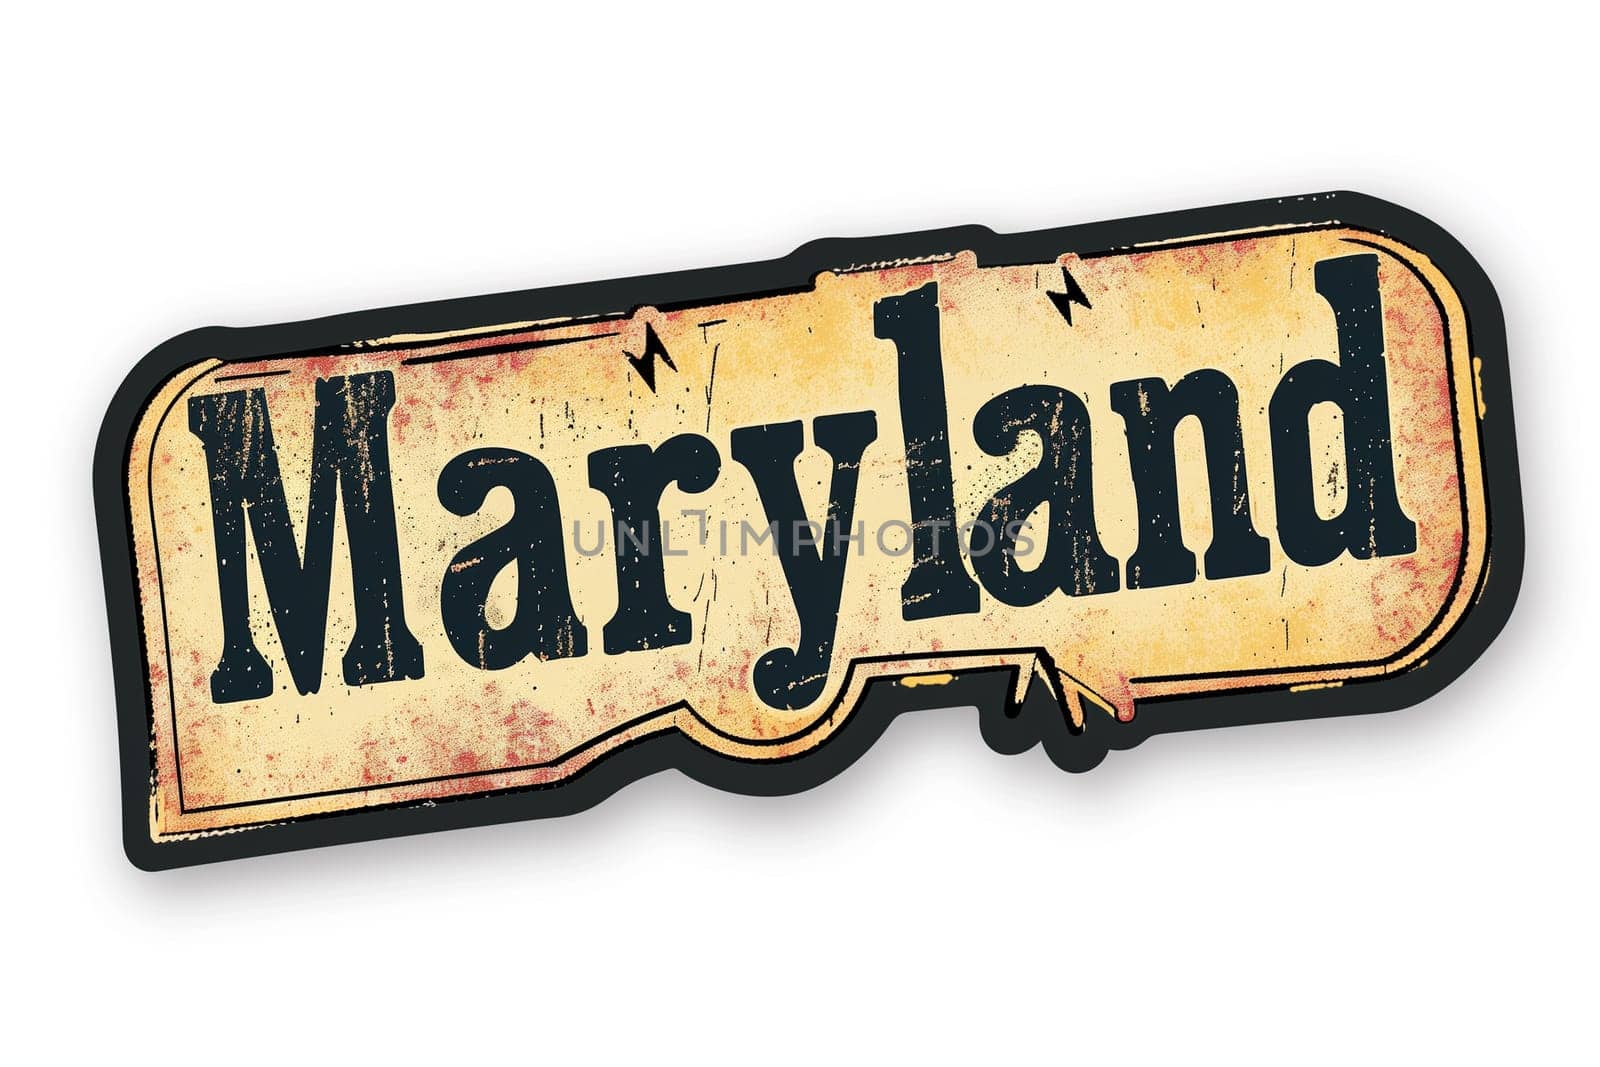 Maryland Sign in Urban Setting by Sd28DimoN_1976